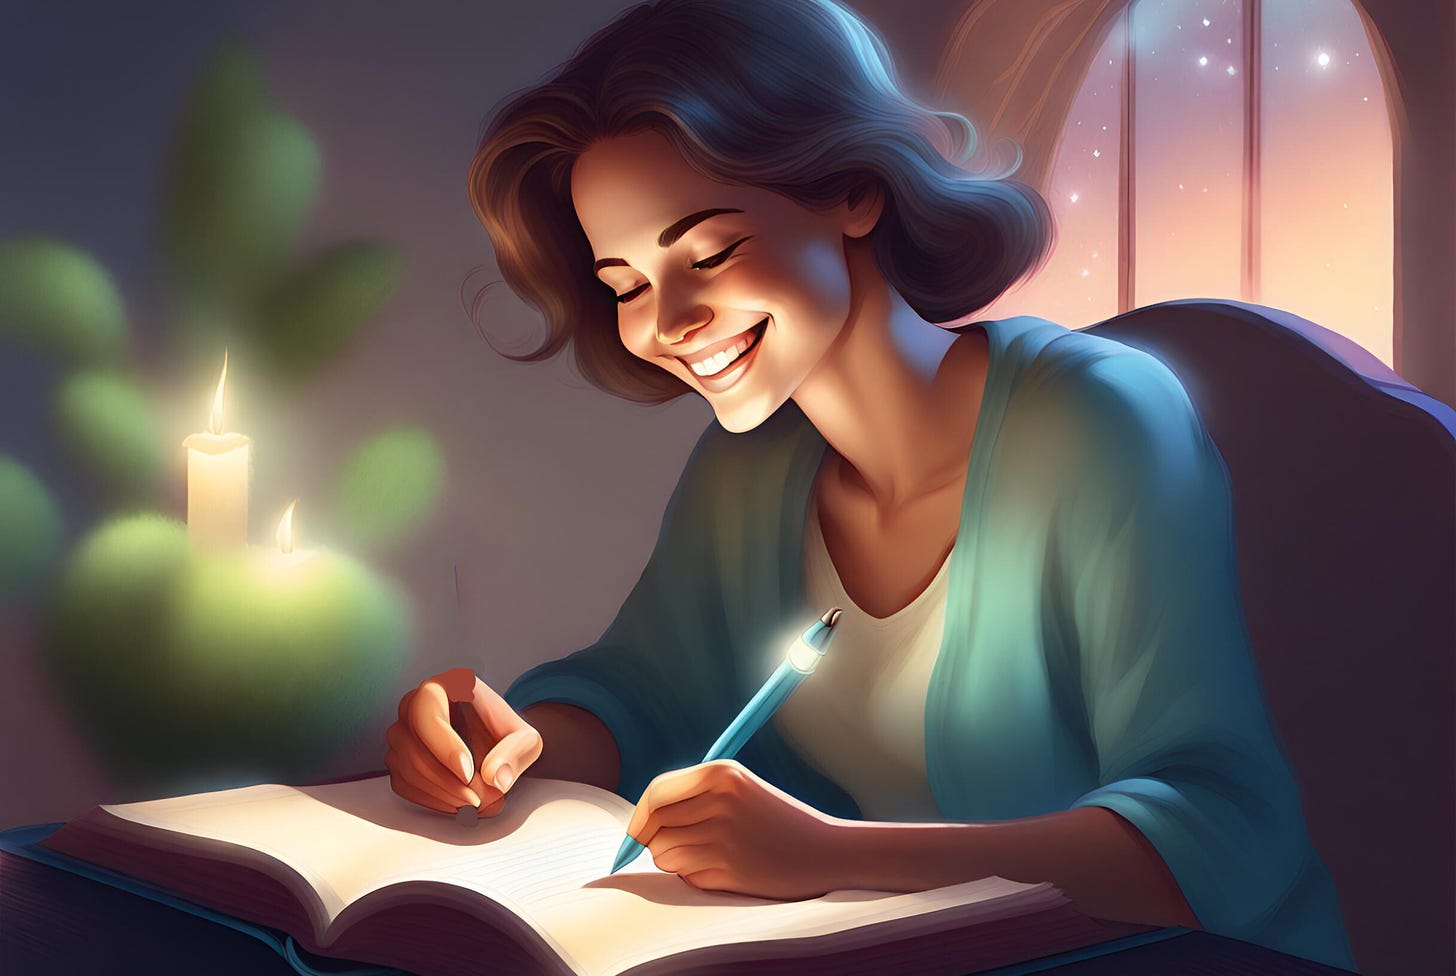 Illustration of a happy woman writing in a journal